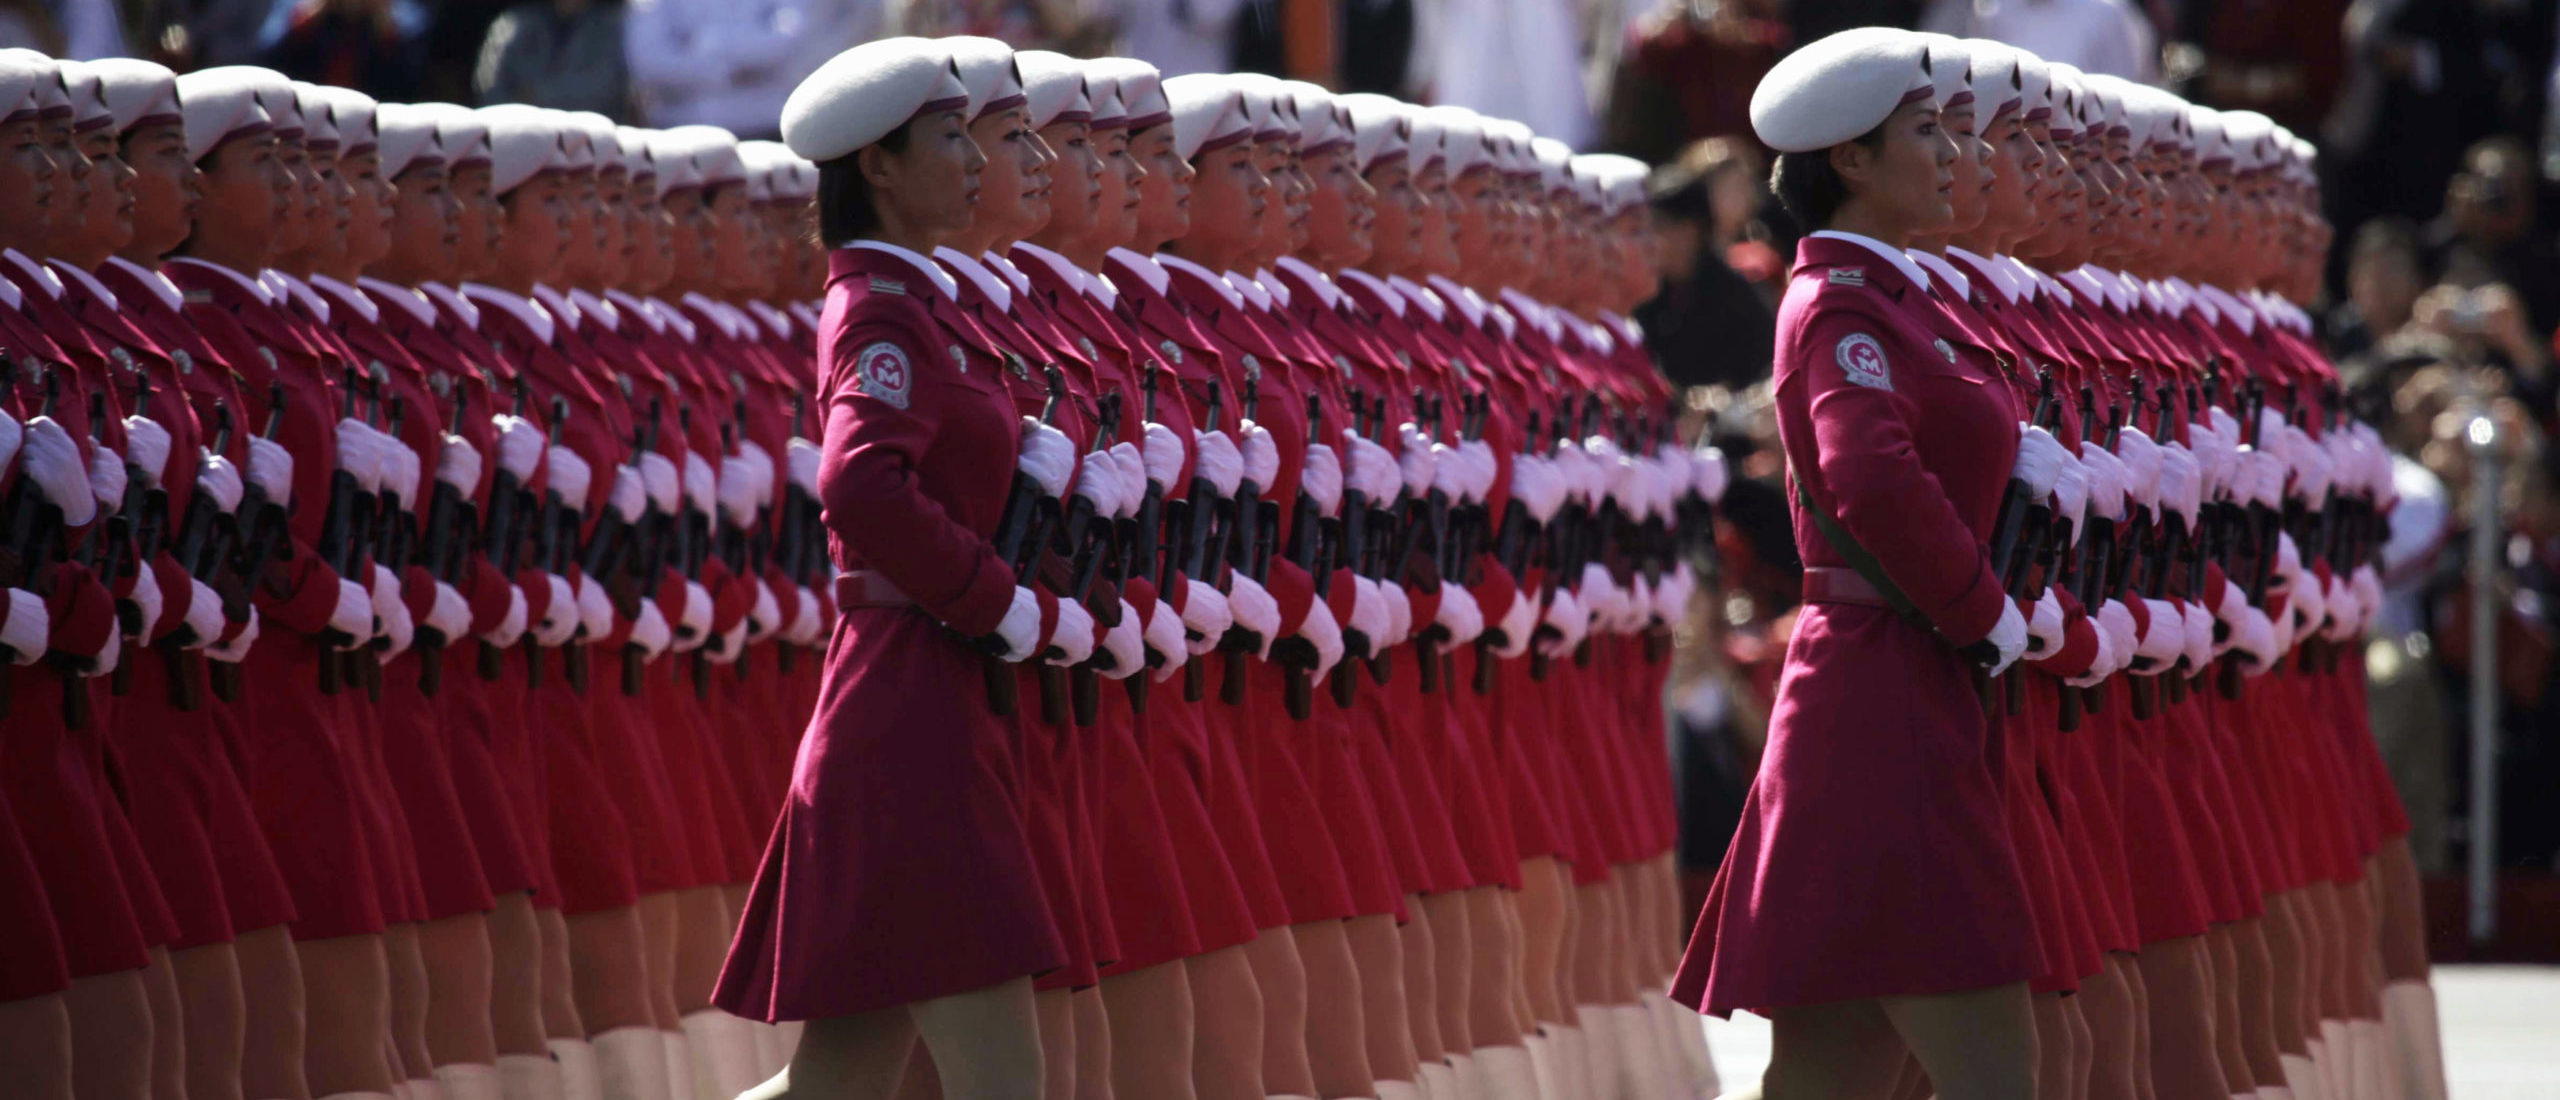 Female members of a Chinese militia march in formation past Tiananmen Square during a massive parade to mark the 60th anniversary of the founding of the People's Republic of China, in Beijing October 1, 2009. (REUTERS/Nir Elias)